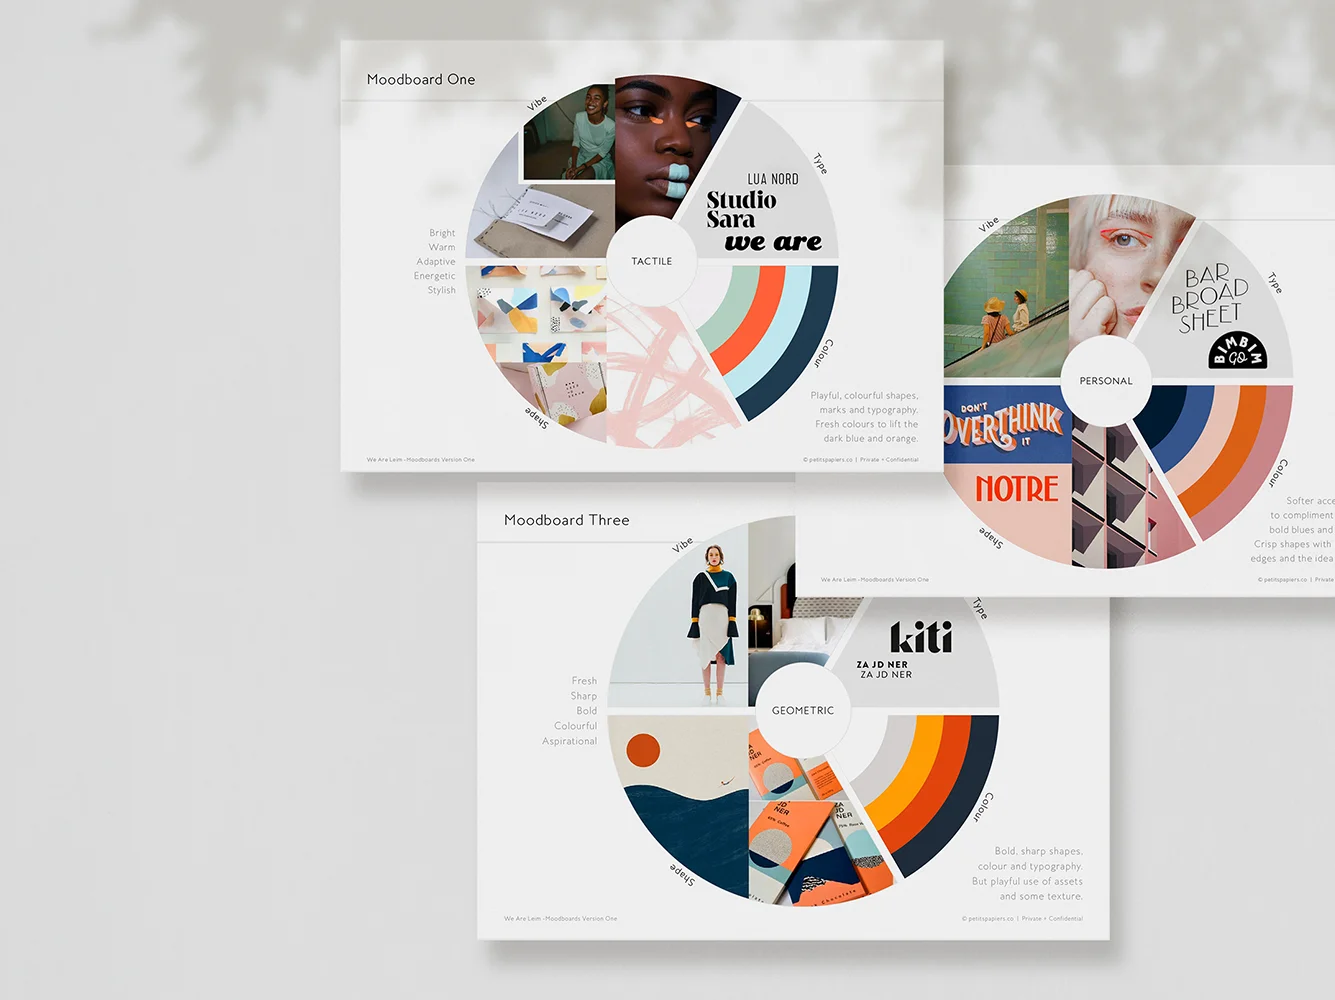 moodboards showing the creative development process for the Leim brand identity by Petits Papiers